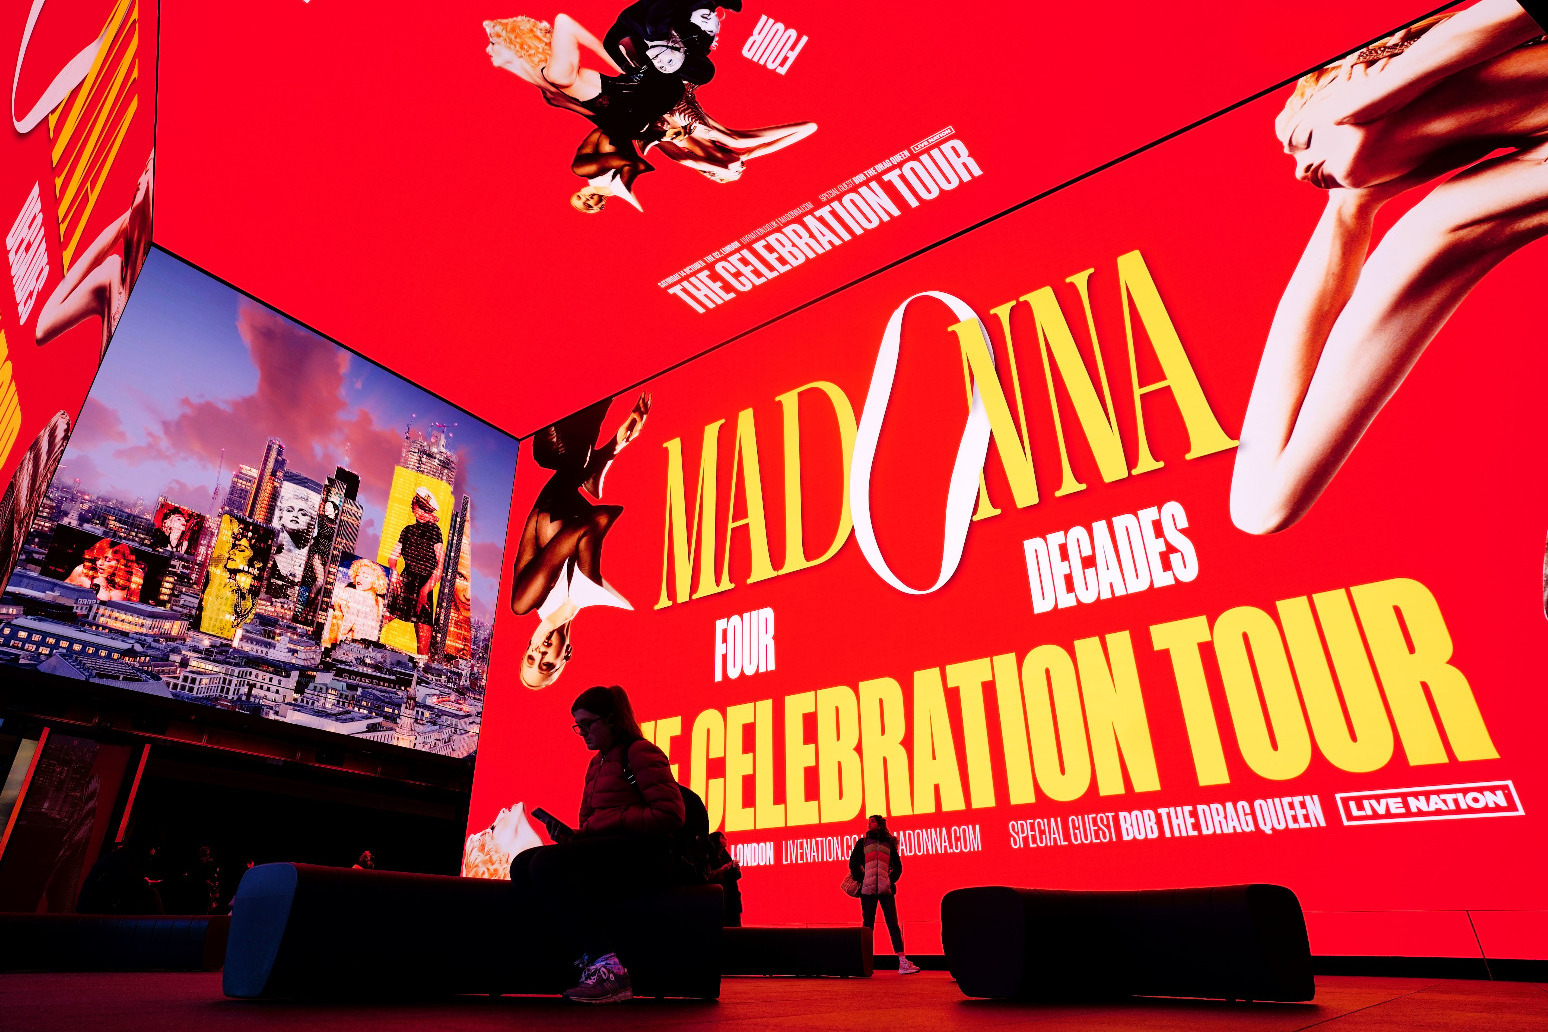 Queen Of Pop Madonna to embark on global greatest hits tour 